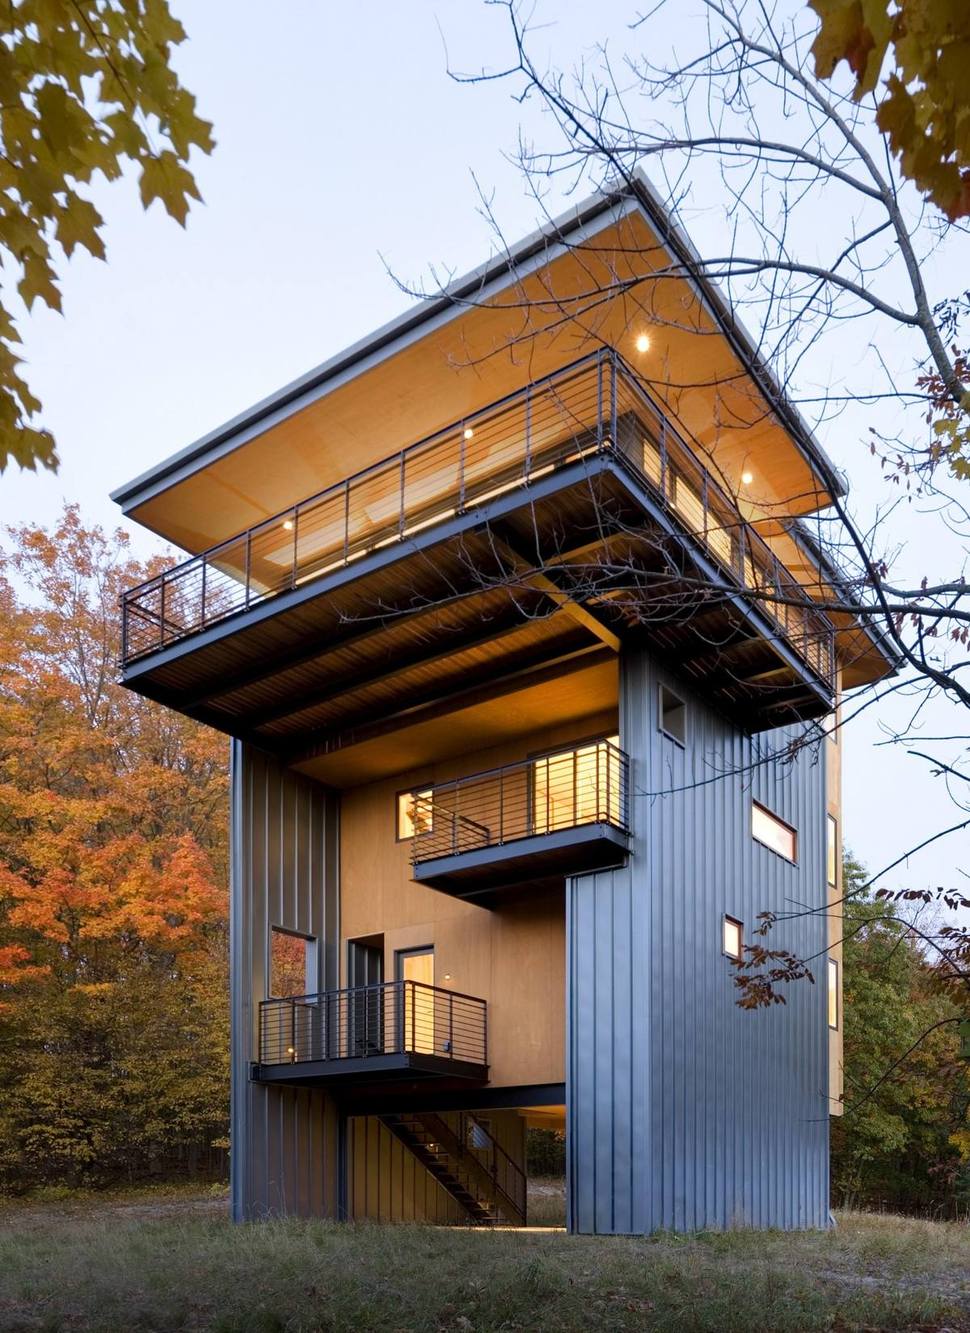 4-Storey Tall House Reaches Above the Forest to See the ...